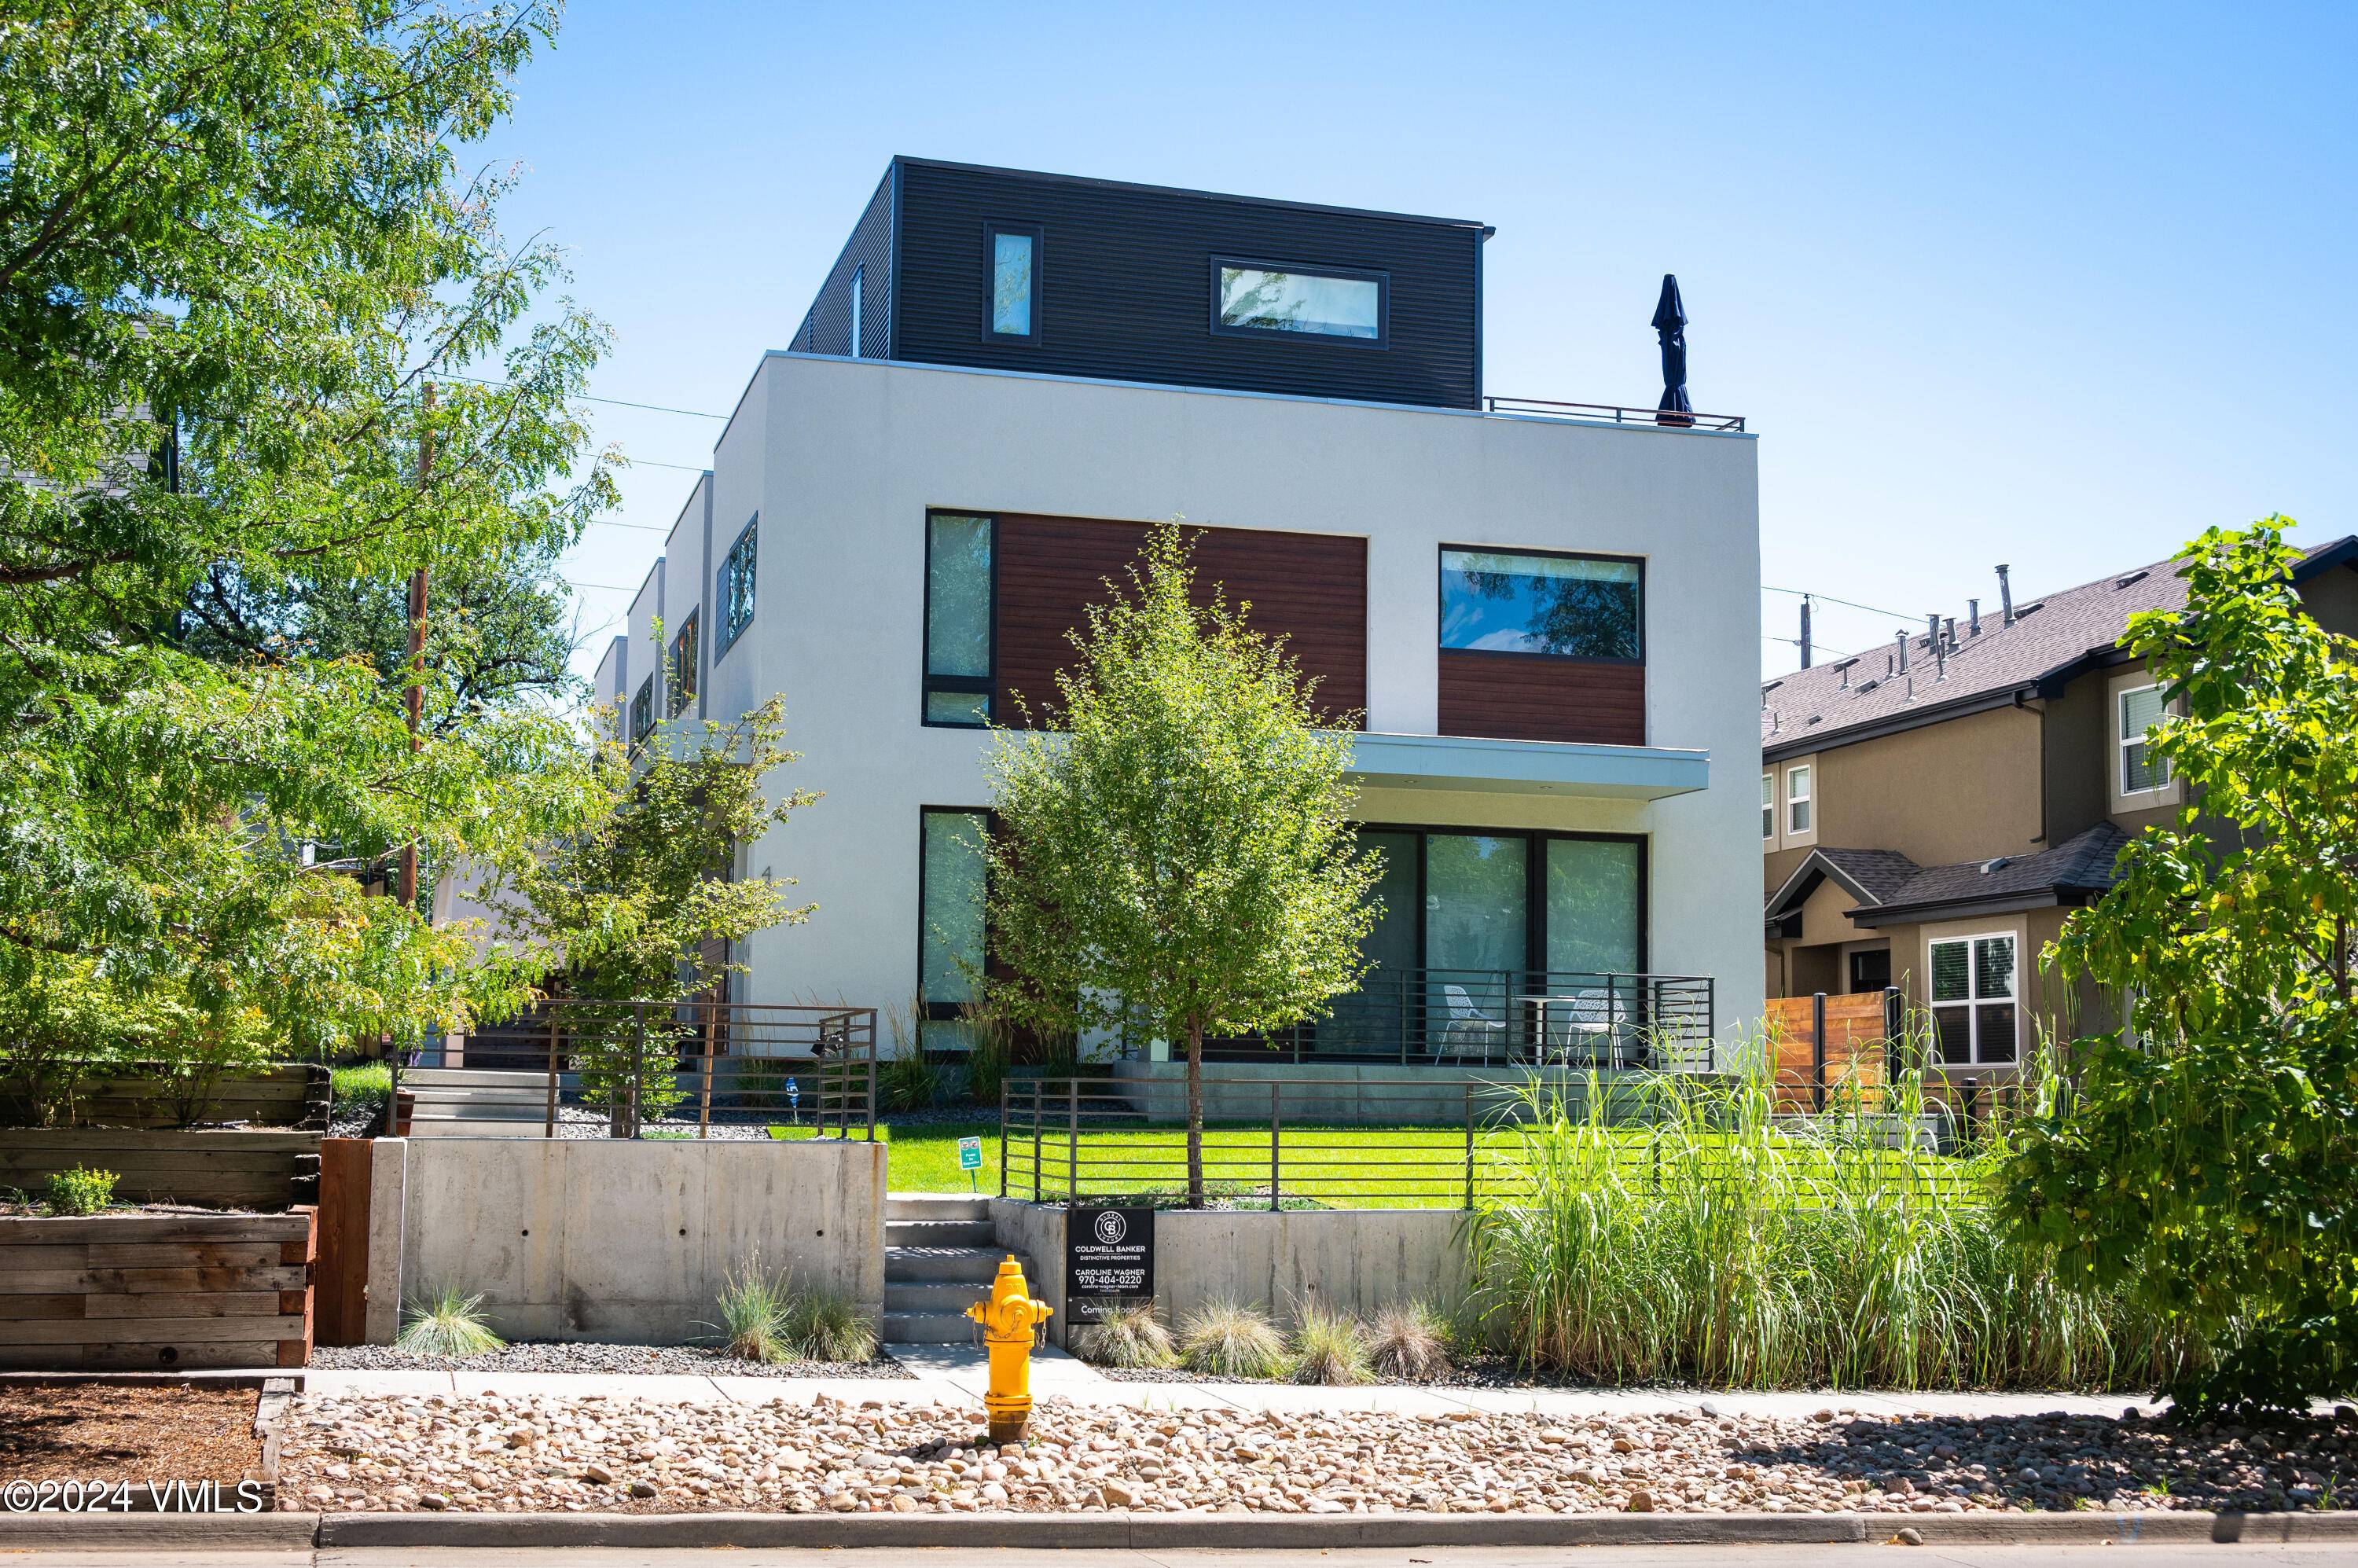 Stunning new design boutique development in Cherry Creek North w your own rooftop deck and attached private garage only unit with this feature.